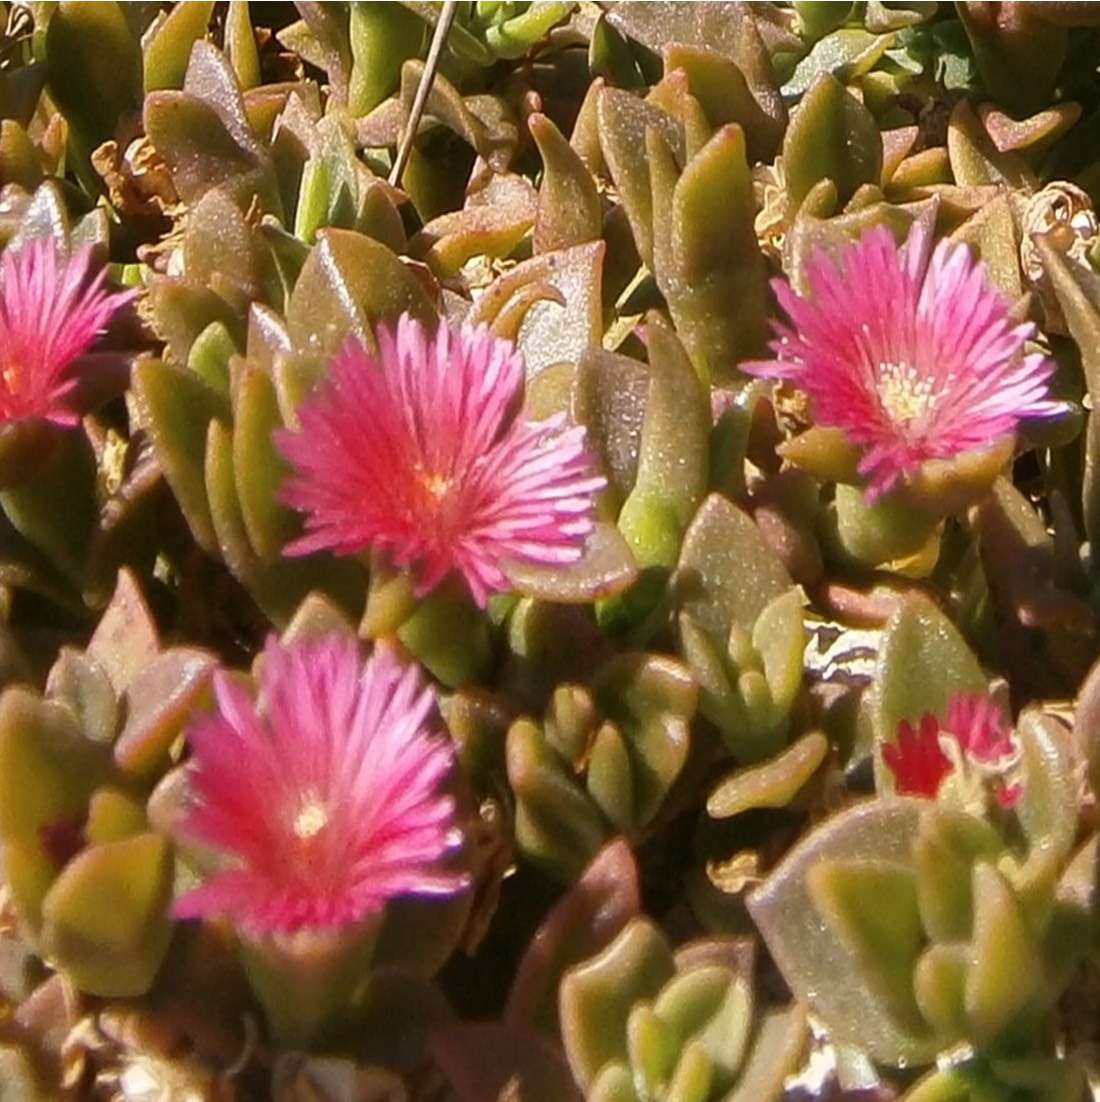 RED HOTTENTOT FIG